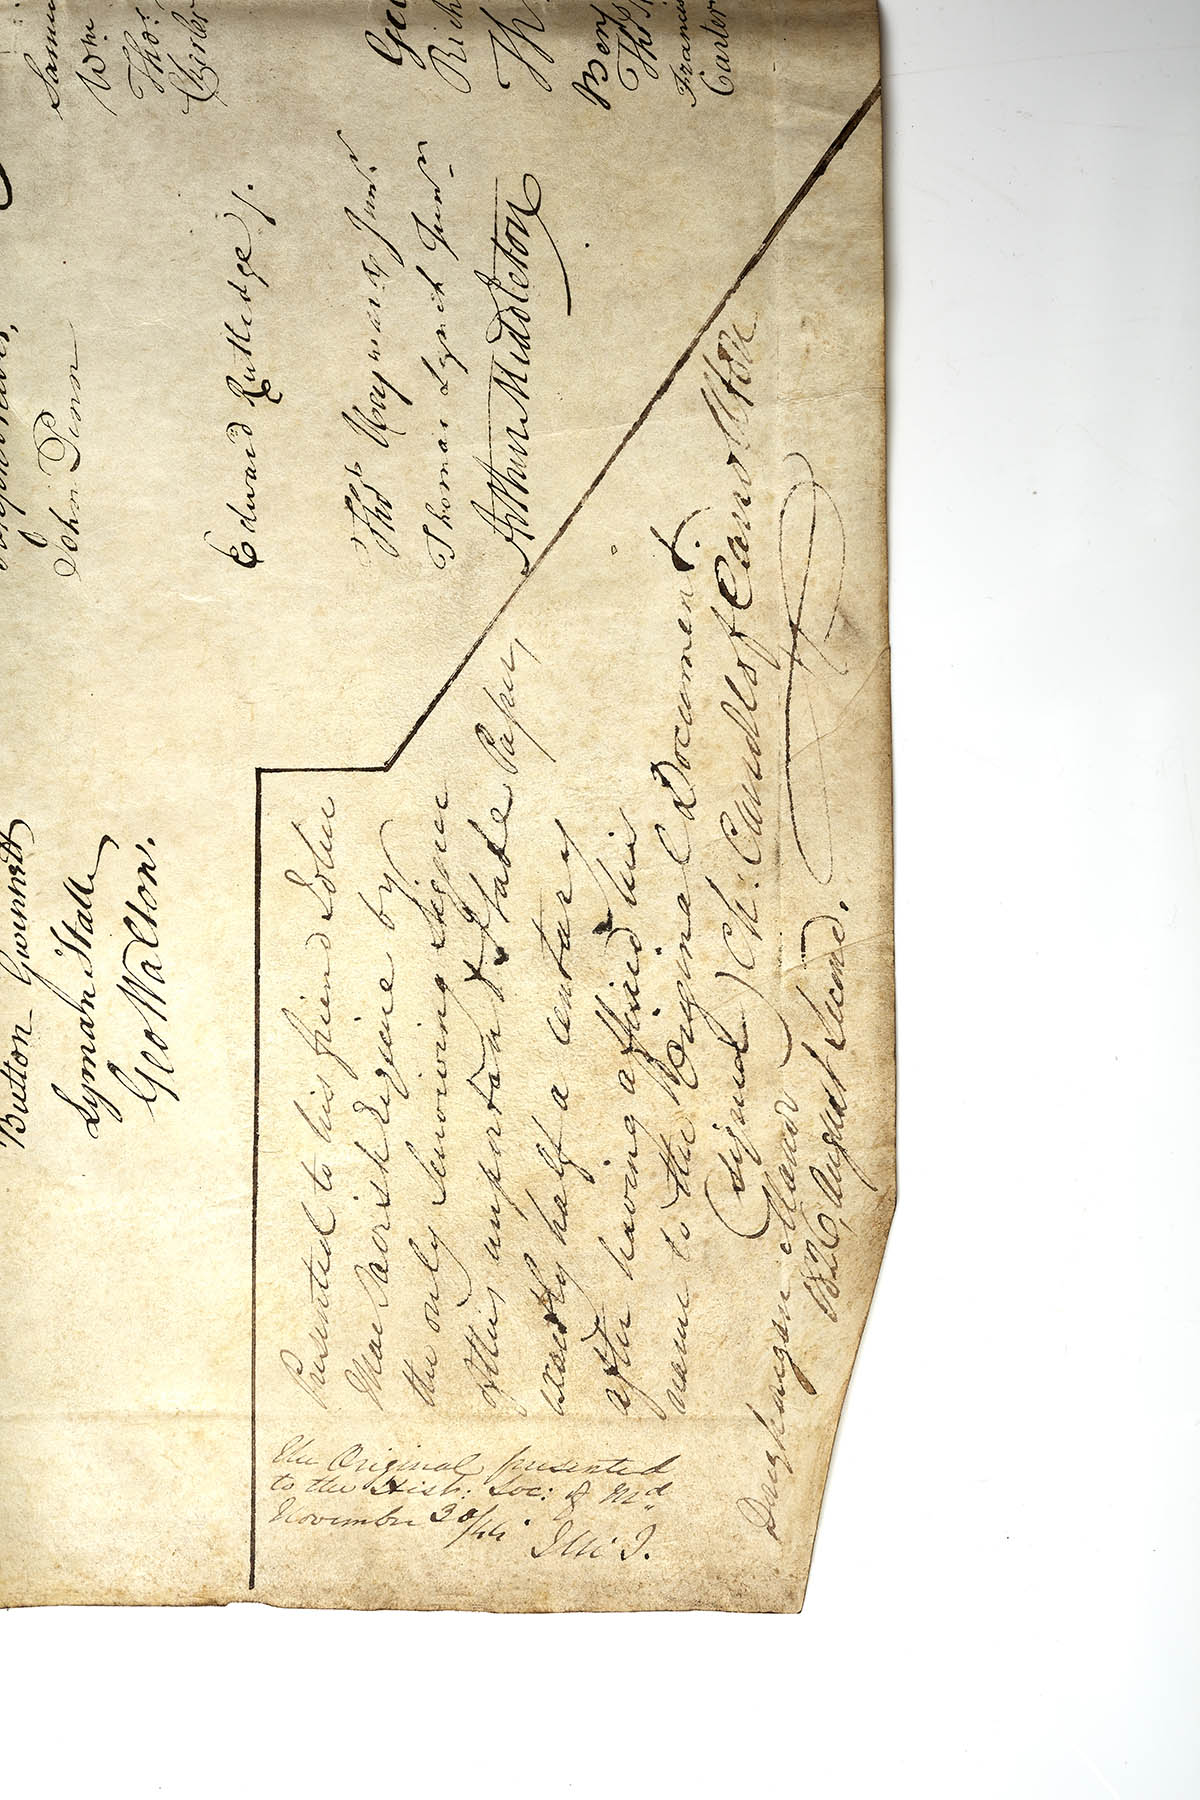  (This Important State Paper: Signer Charles Carroll's Copy of the Declaration of Independence, July 1, 2021)